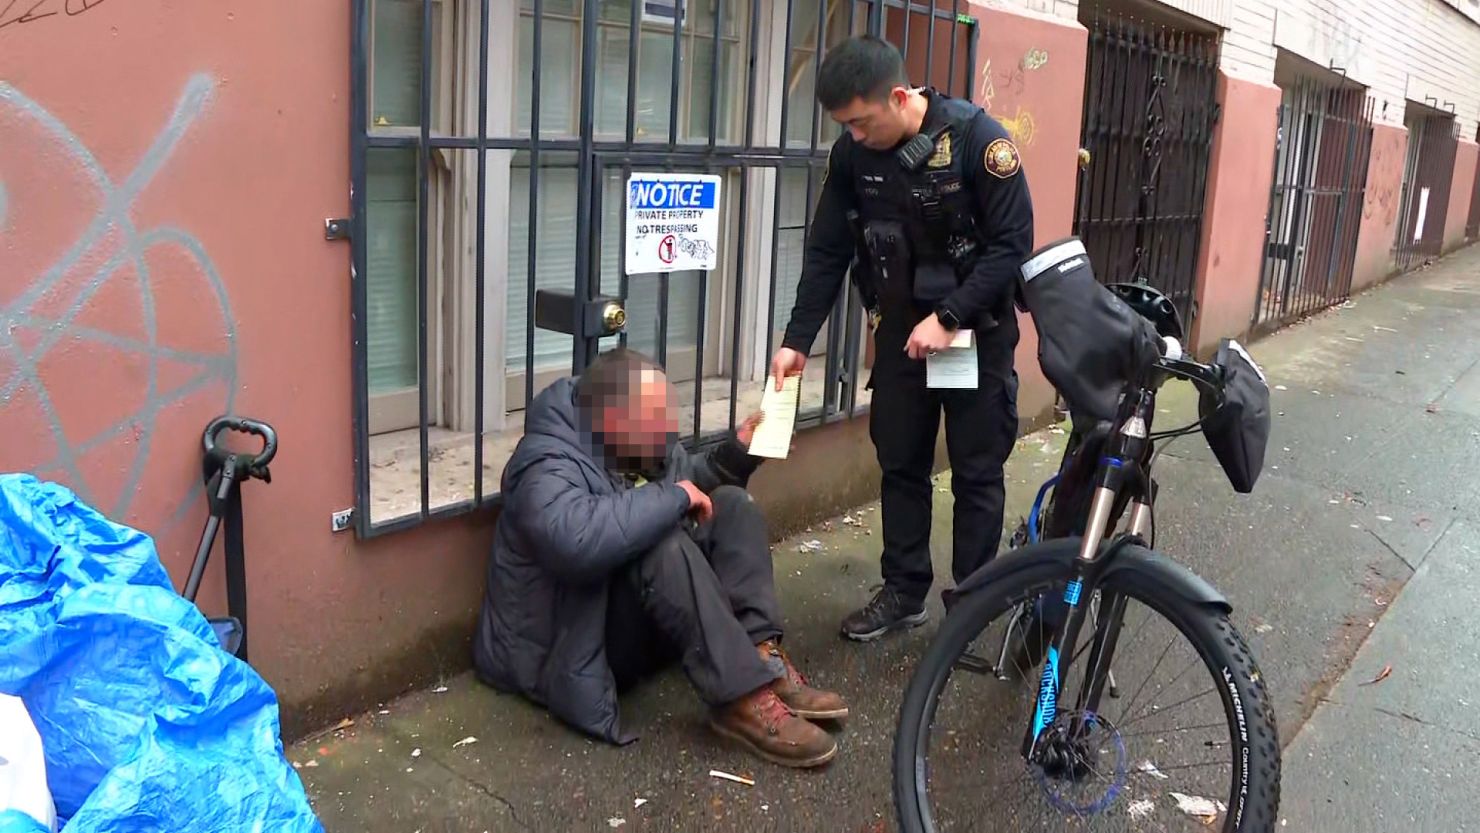 A Portland, Oregon, police officer issues a citation and treatment card to a man using fentanyl in public; CNN has blurred this image to protect the man's identity.